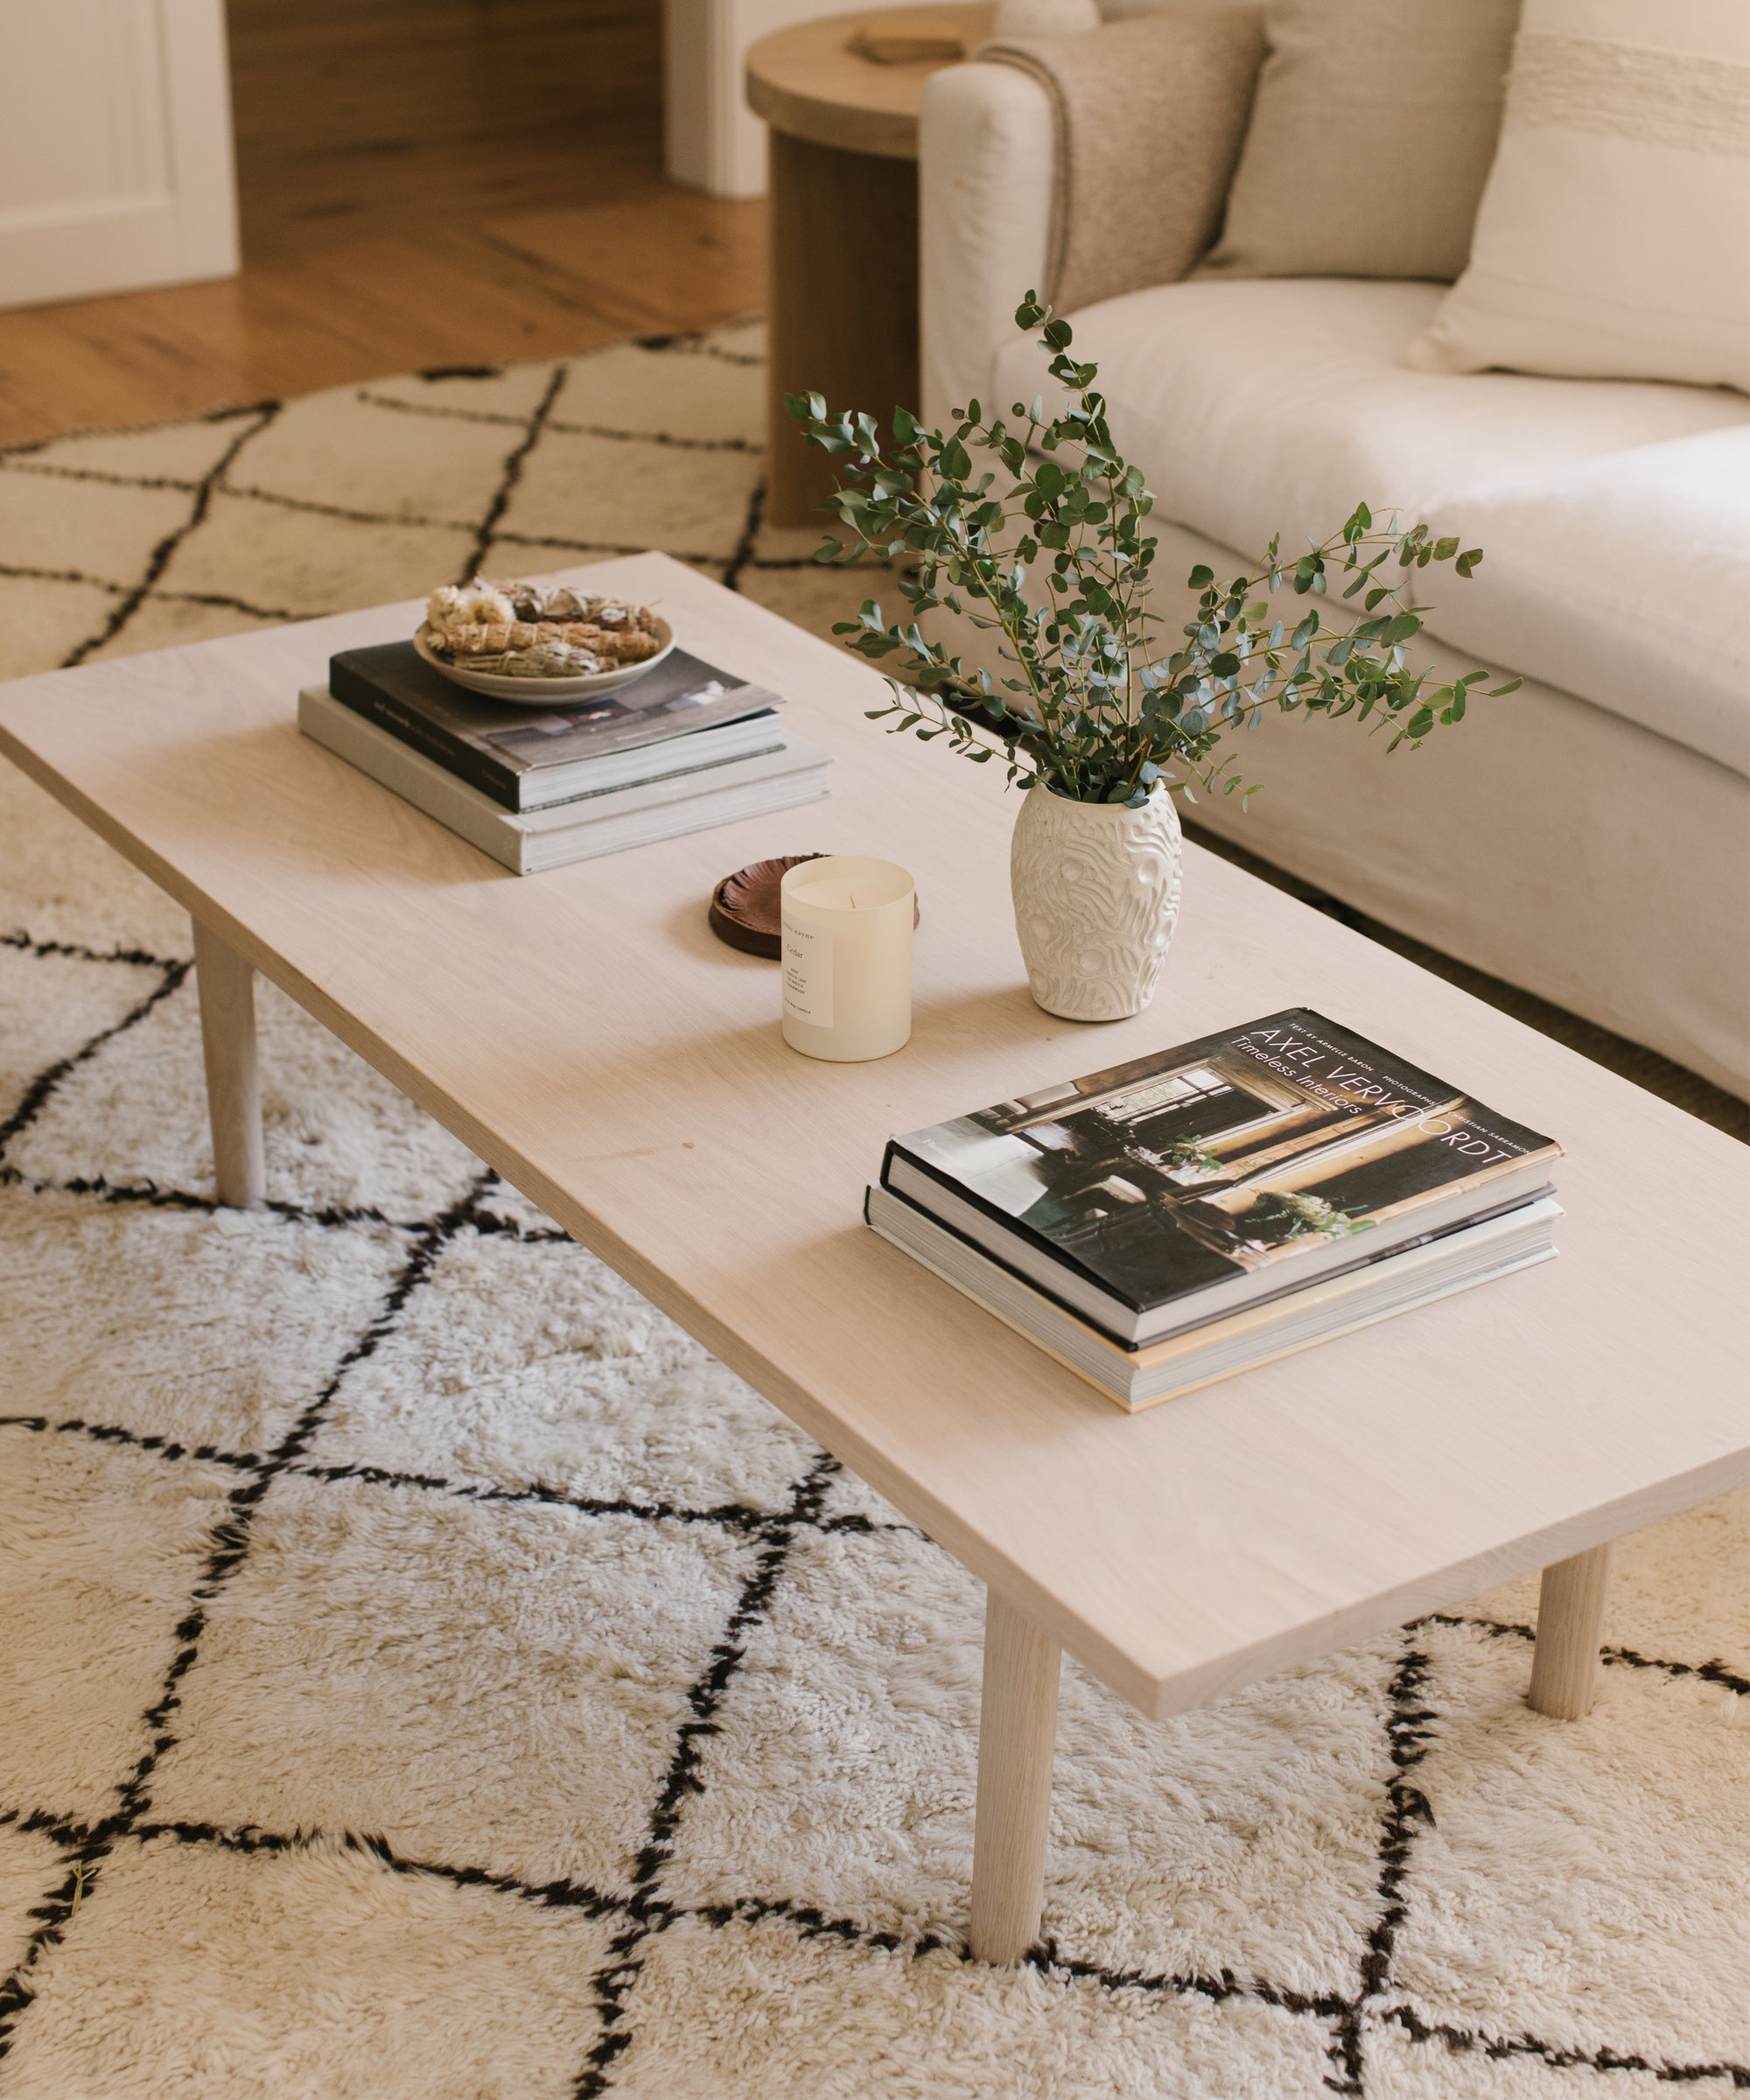 MUST HAVE COFFEE TABLE BOOKS ON INTERIOR DESIGN